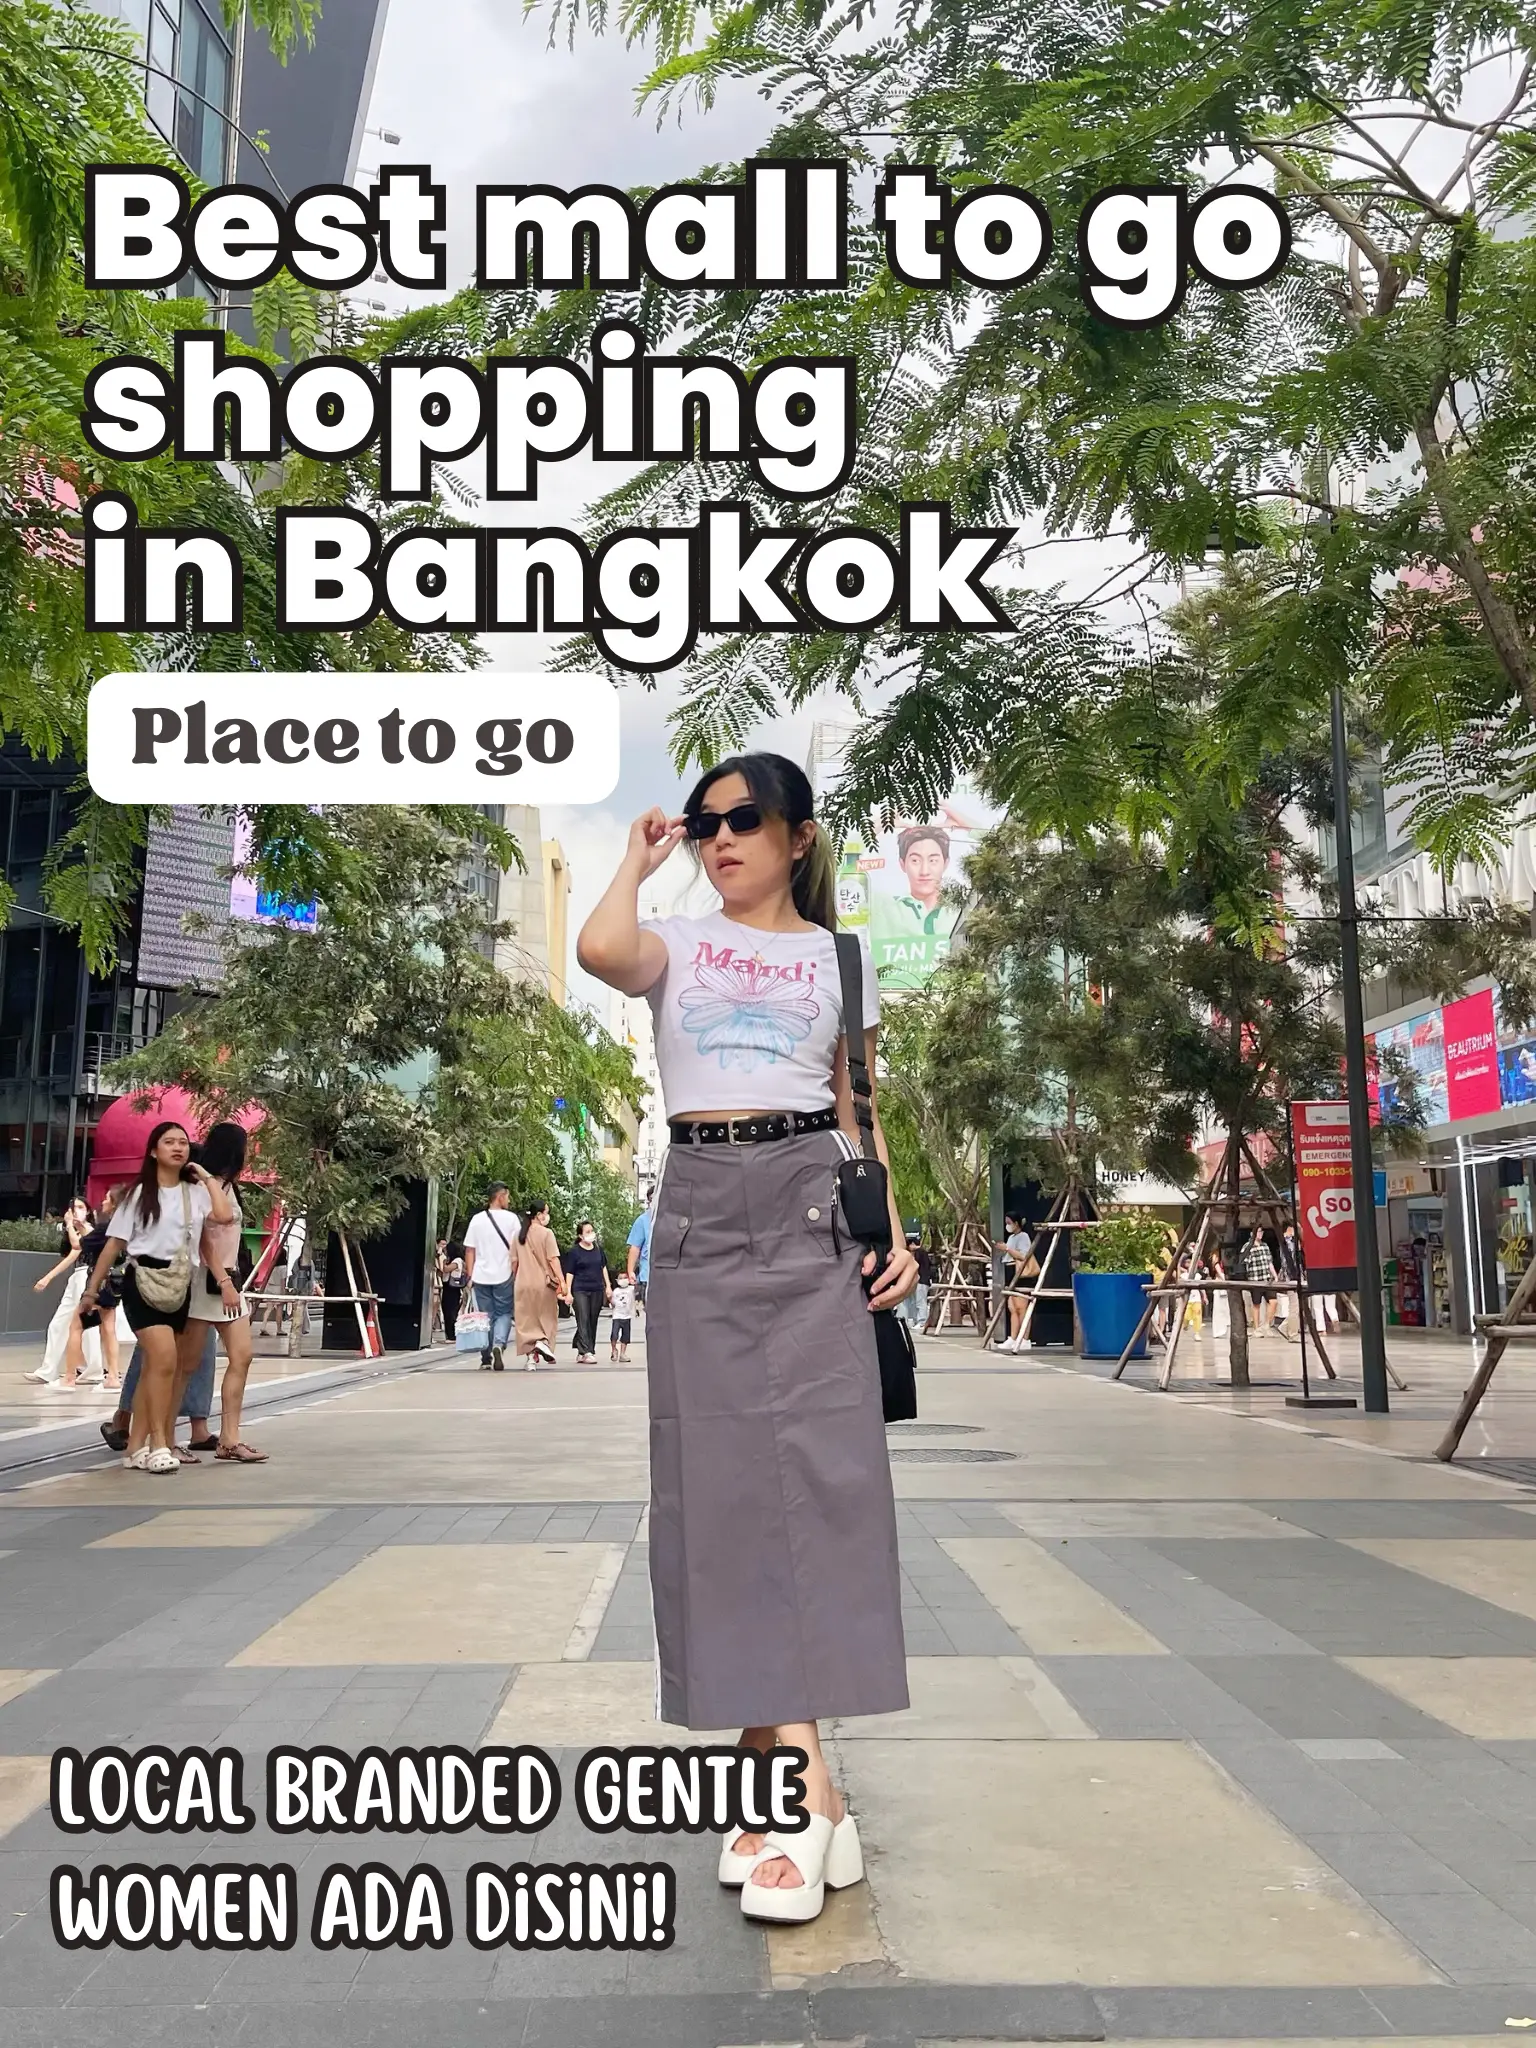 The Best Places to Go Shopping in Bangkok